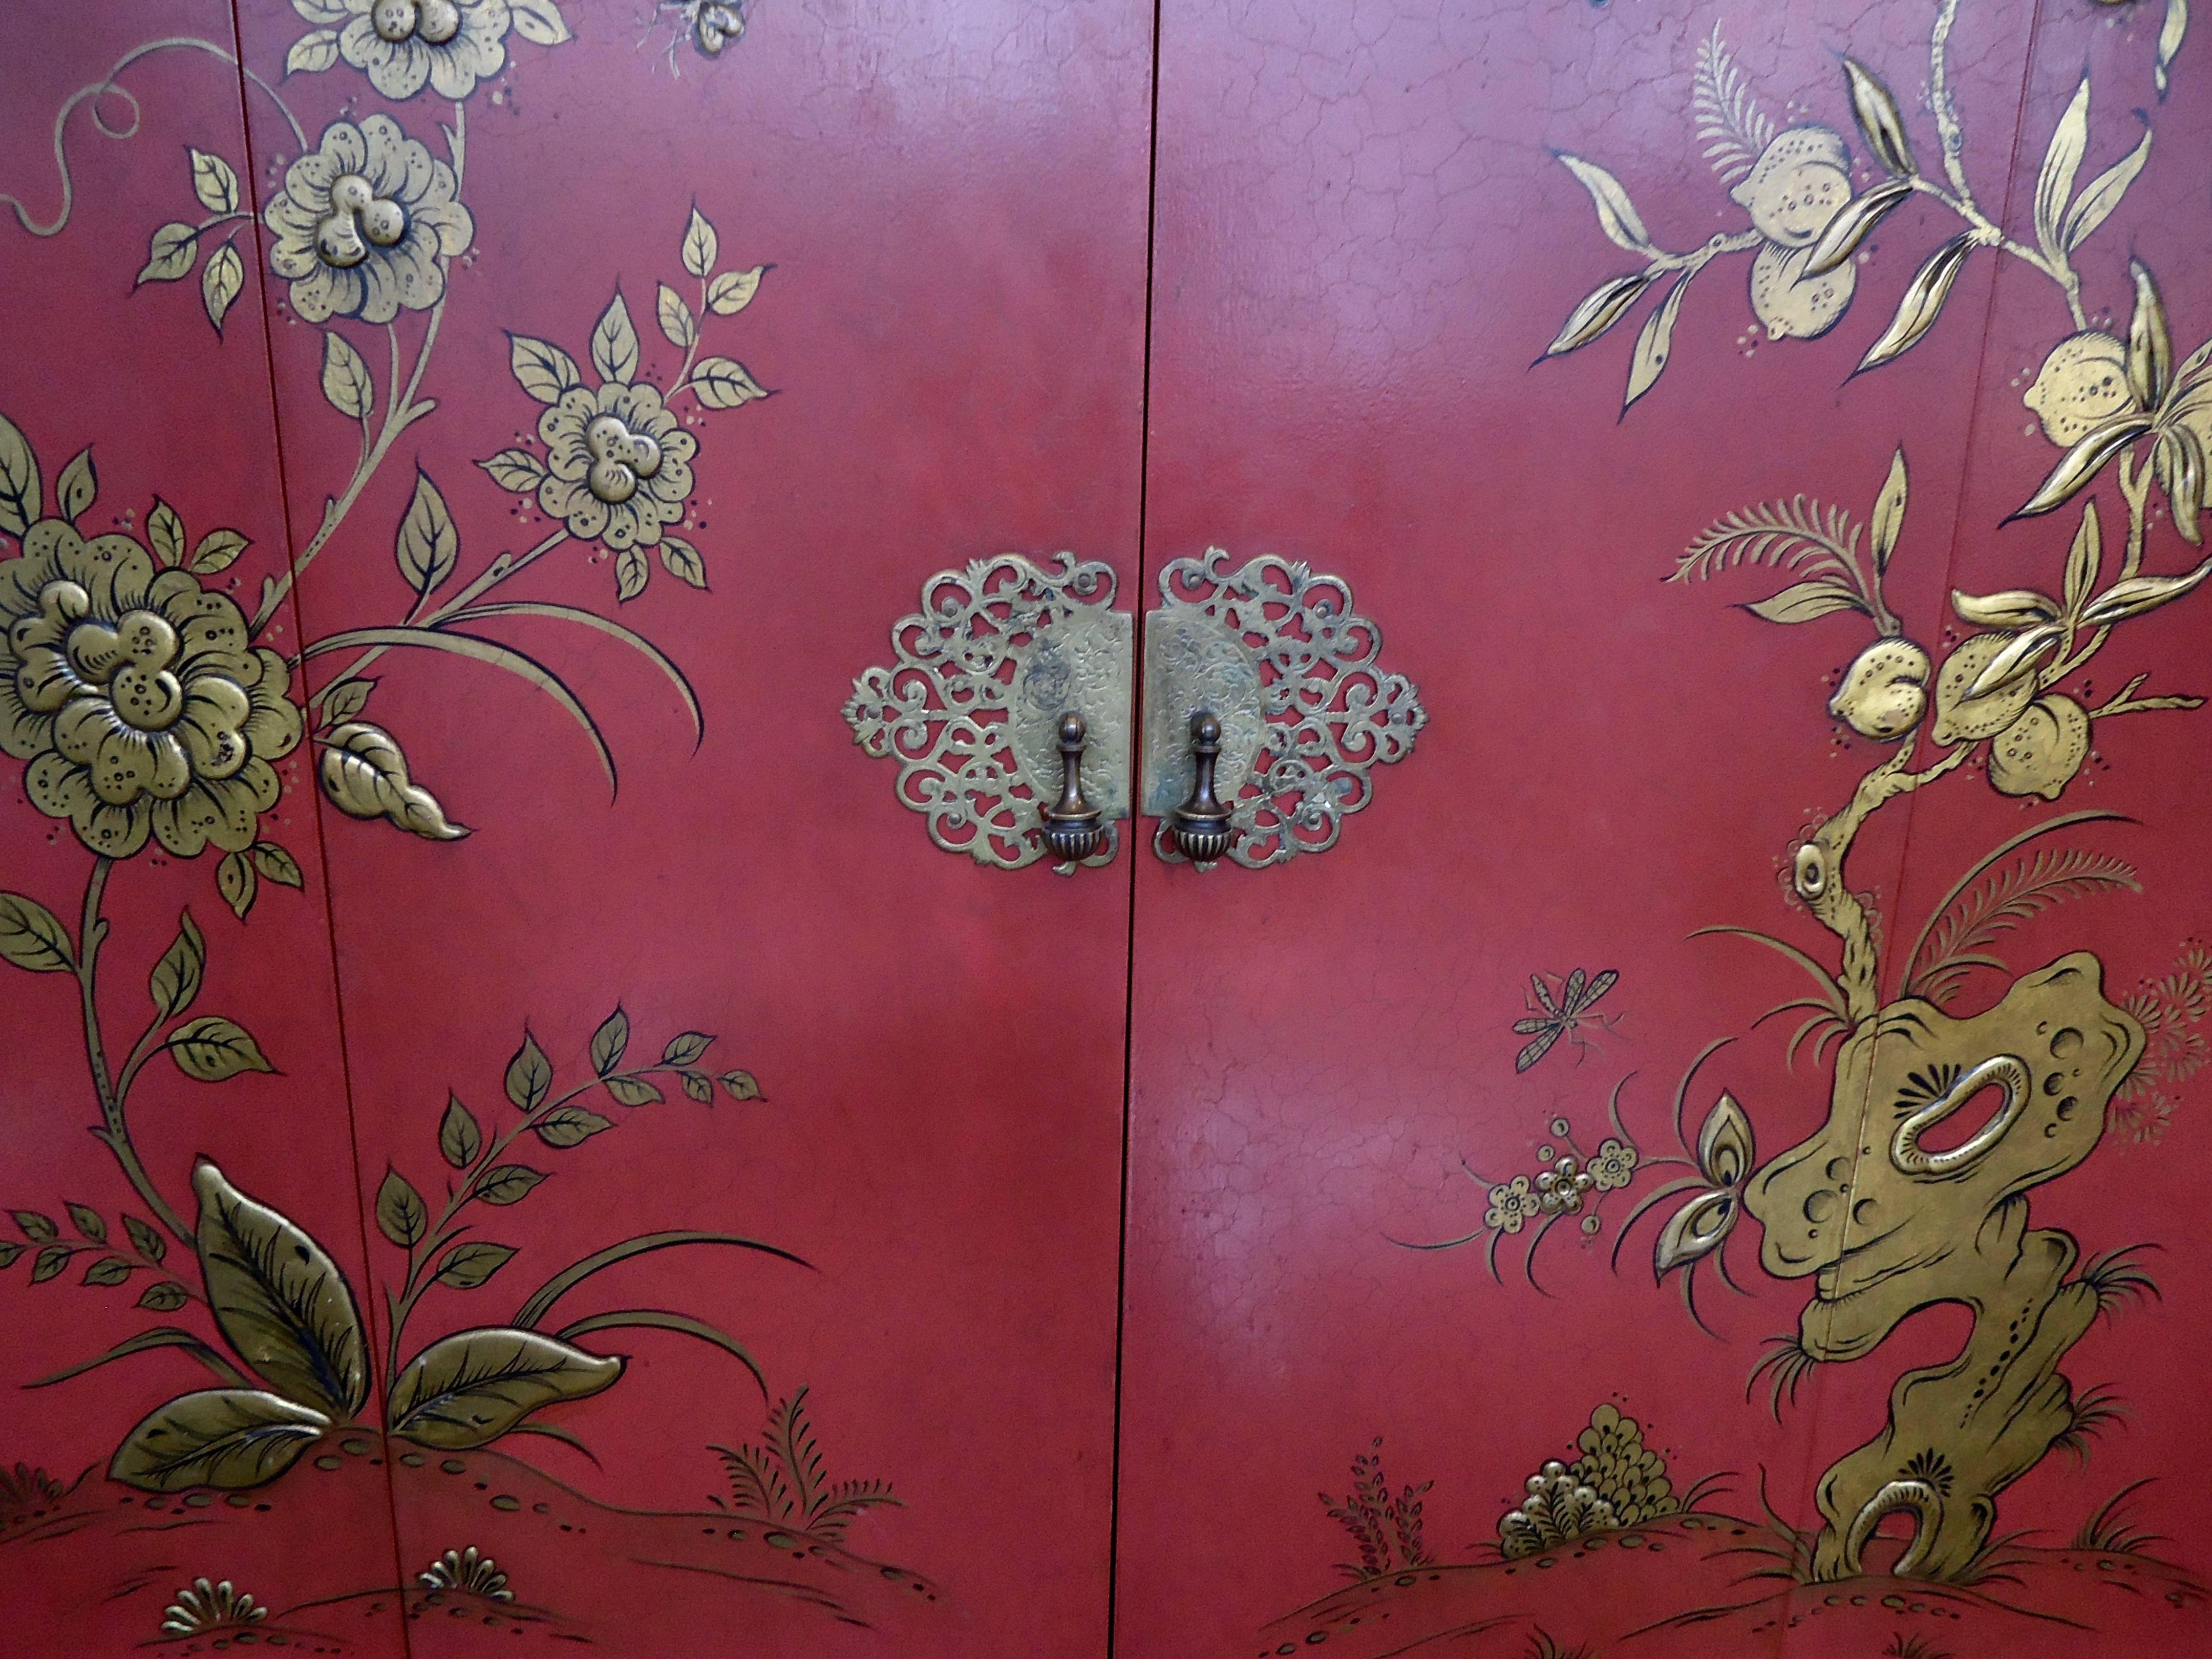 Chic Mid-Century chinoiserie and japanned bar in beautiful shade of coral. Mirrored interior and glass shelves recently added. Japanned exterior bifold doors. Gold leaf fretwork on corners and latice pattern on legs. Left side has inset light.